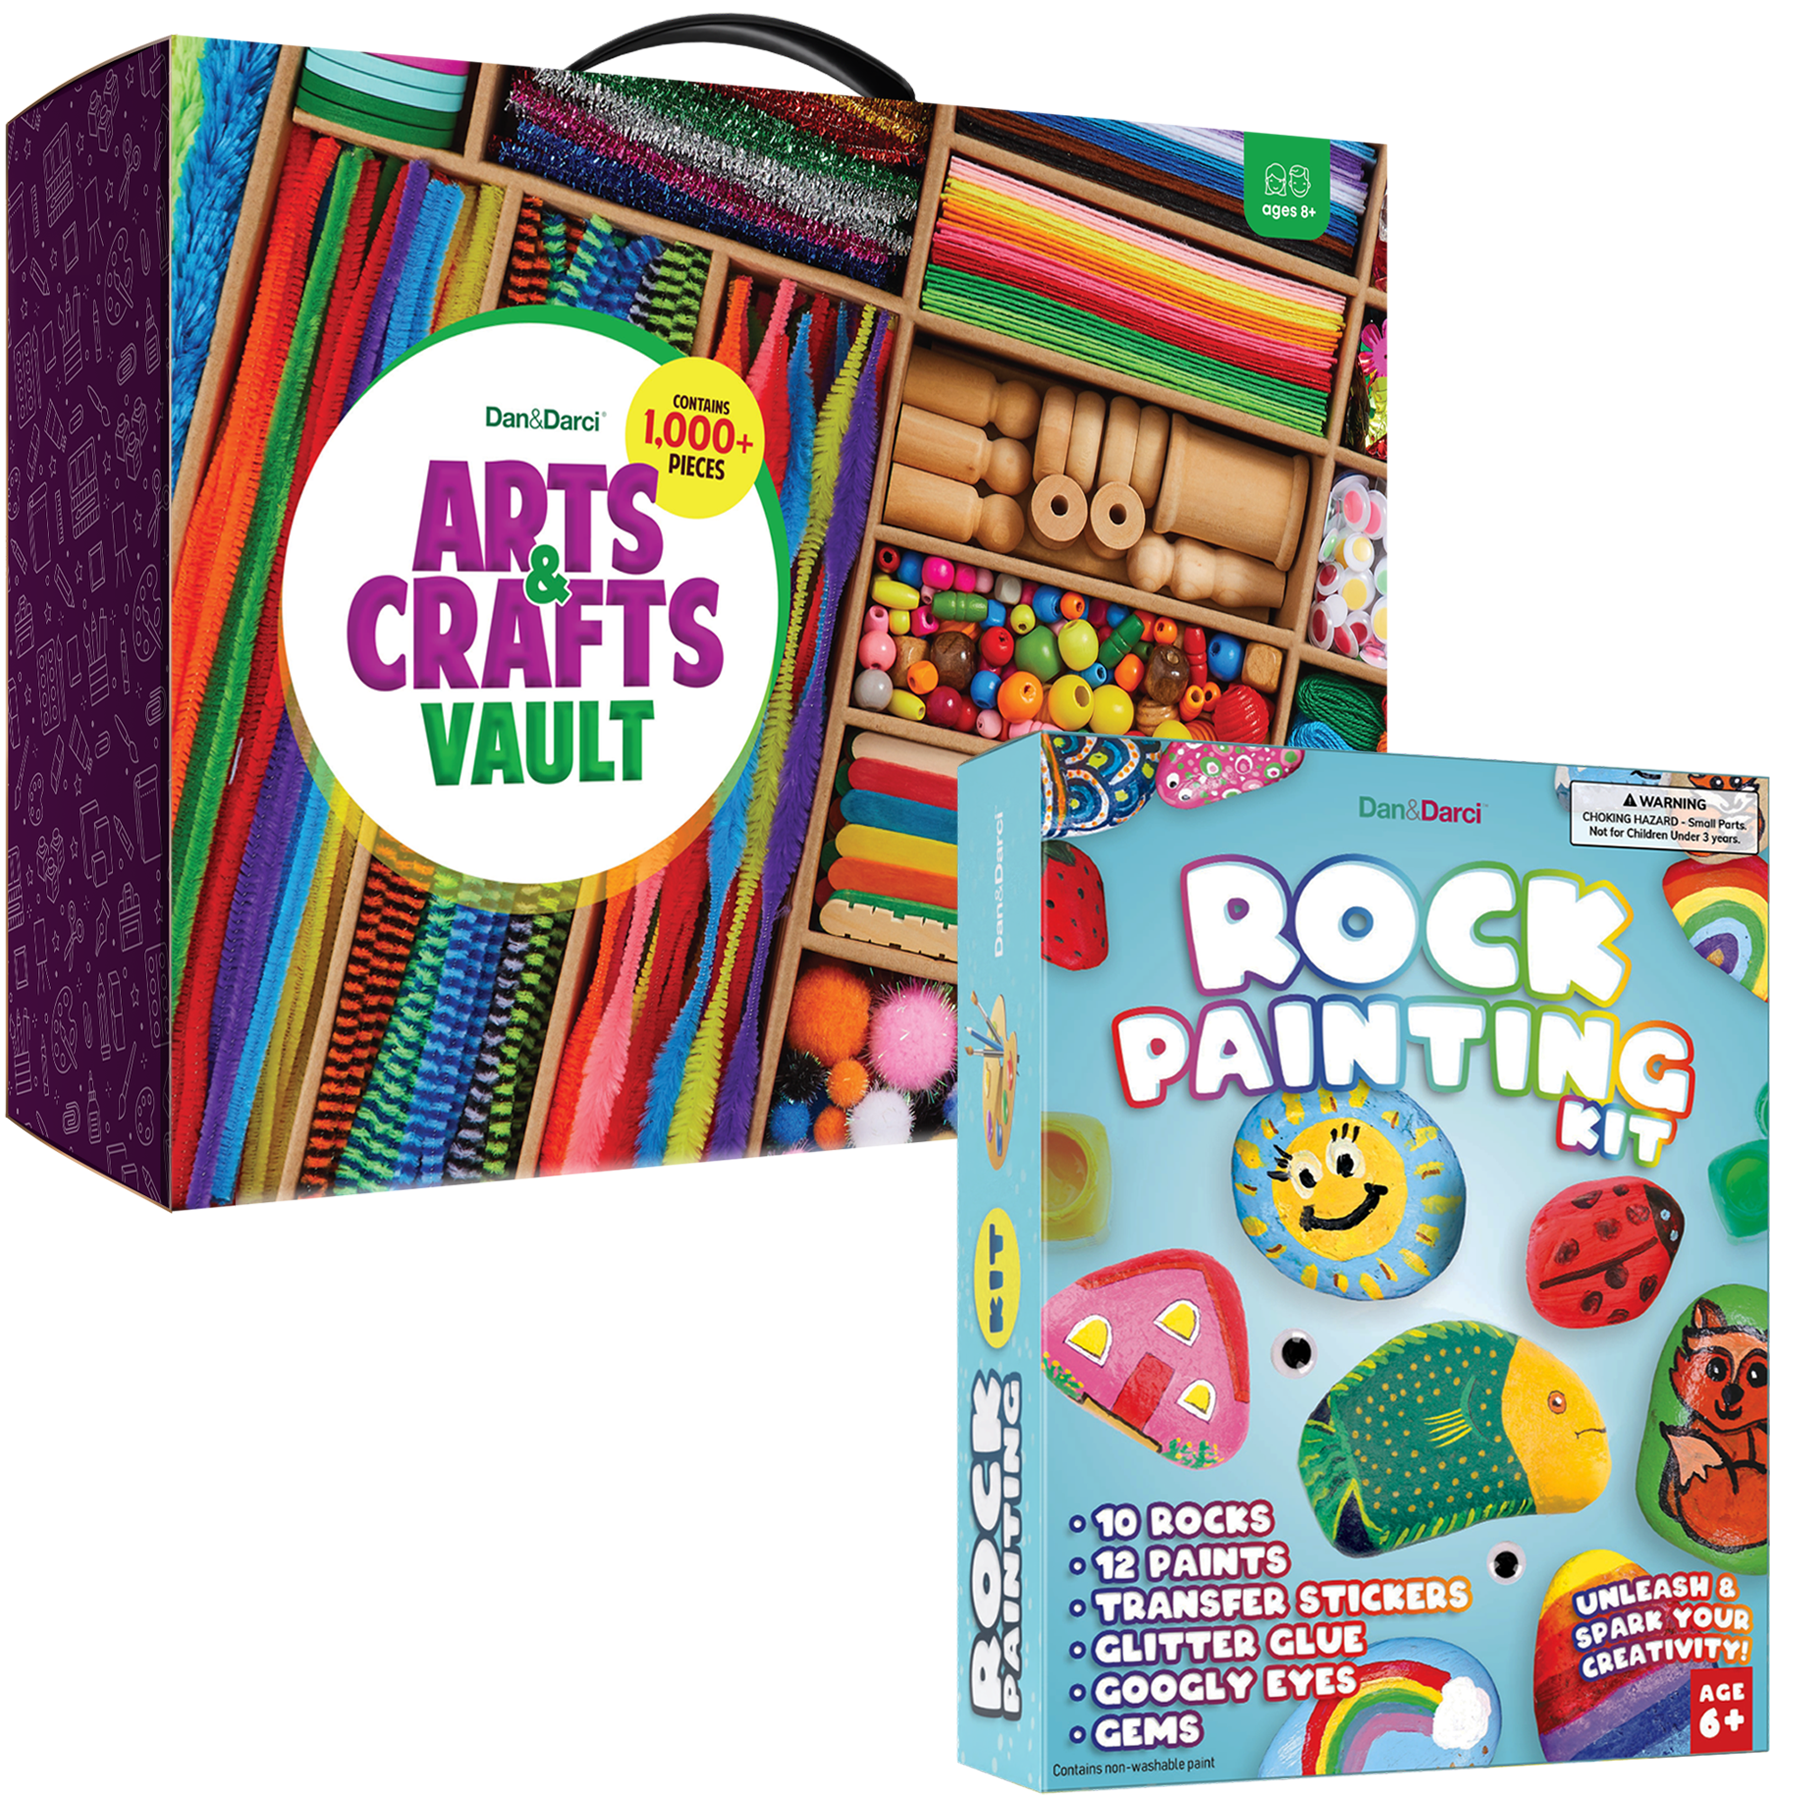 Arts and Crafts Vault 1000 Plus Piece Craft Kit Library in a Box for Kids  Ages 4 5 6 7 8 9 10 11 & 12 Year Old Girls & Boys - Crafting Supply Set  Kits